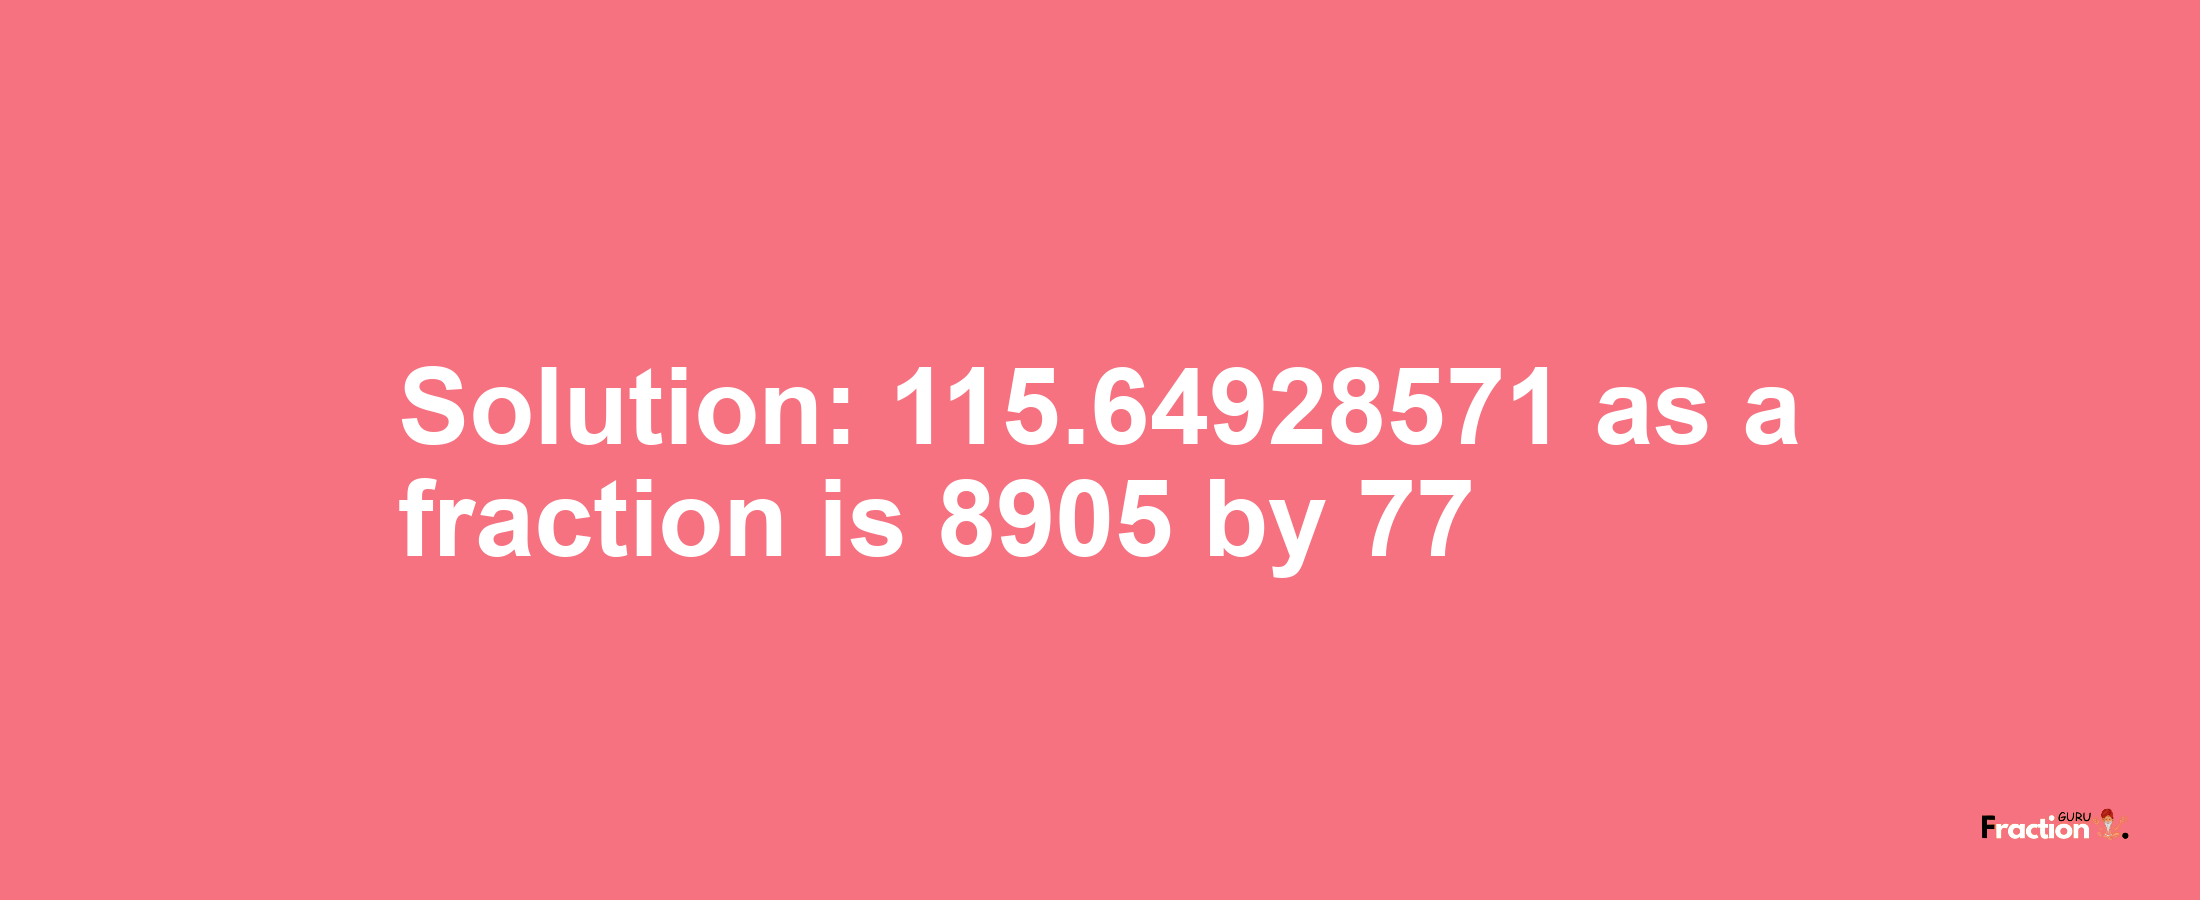 Solution:115.64928571 as a fraction is 8905/77